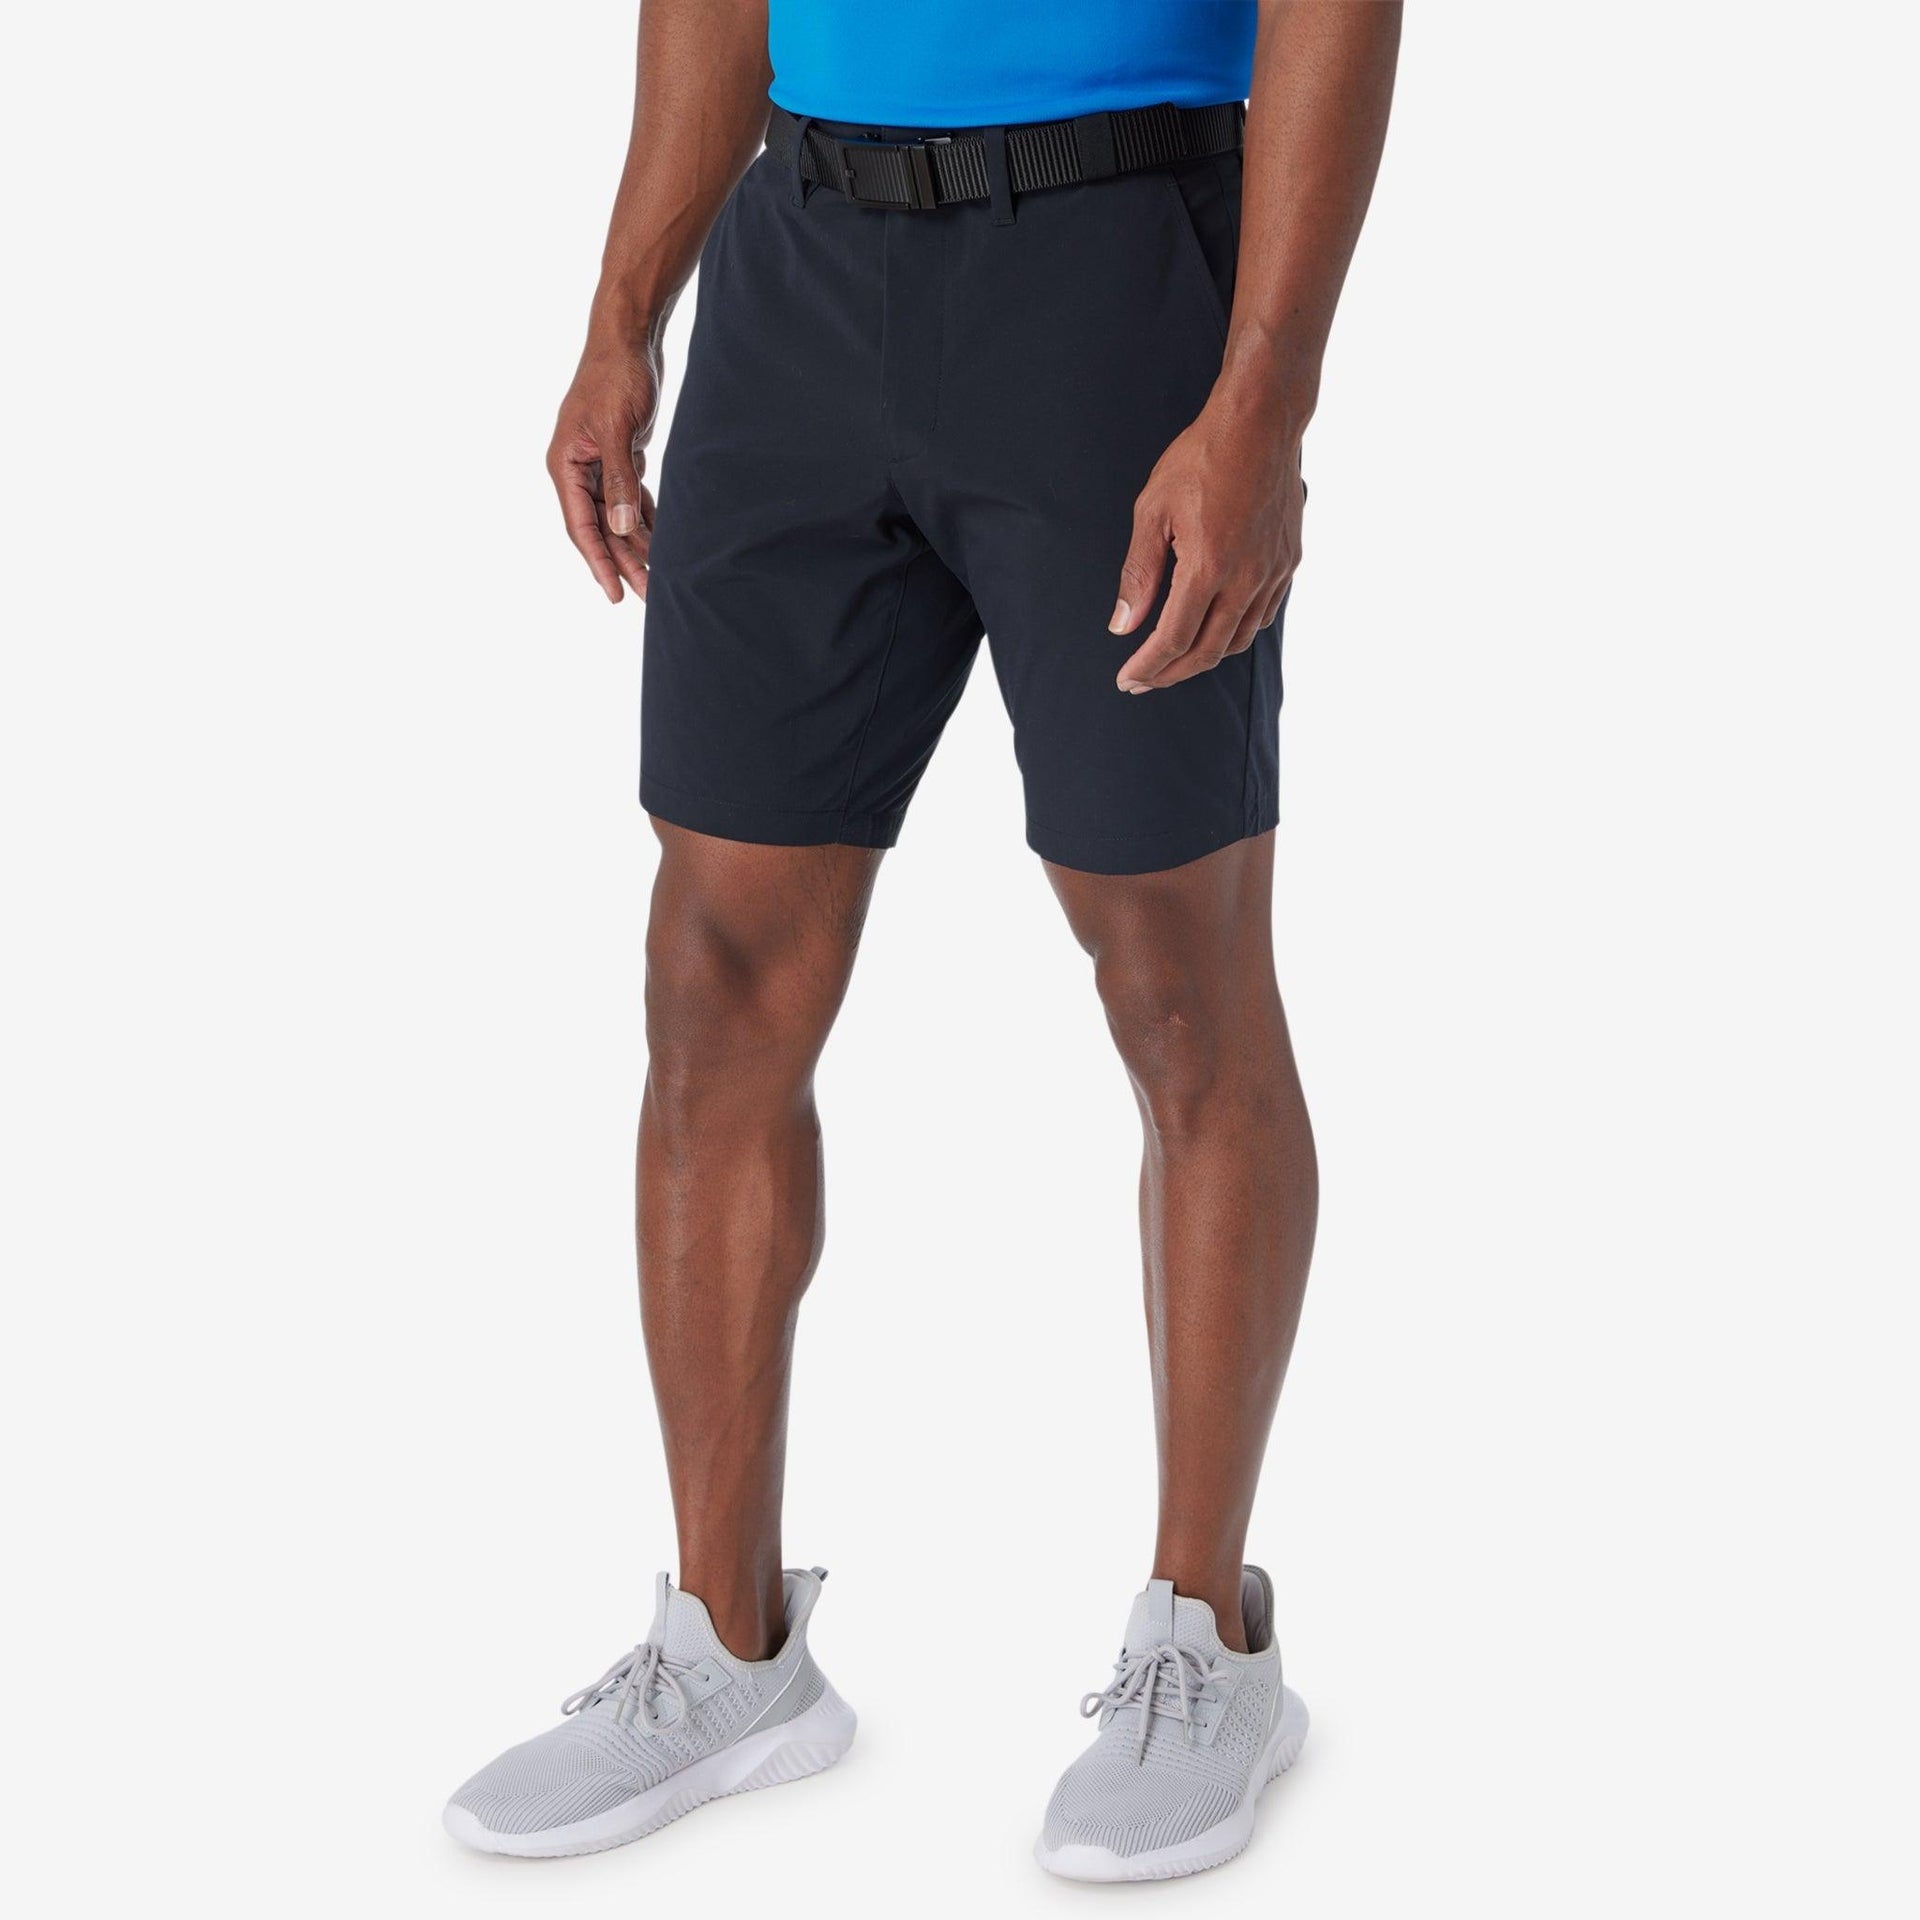 clubhouse short Black 36